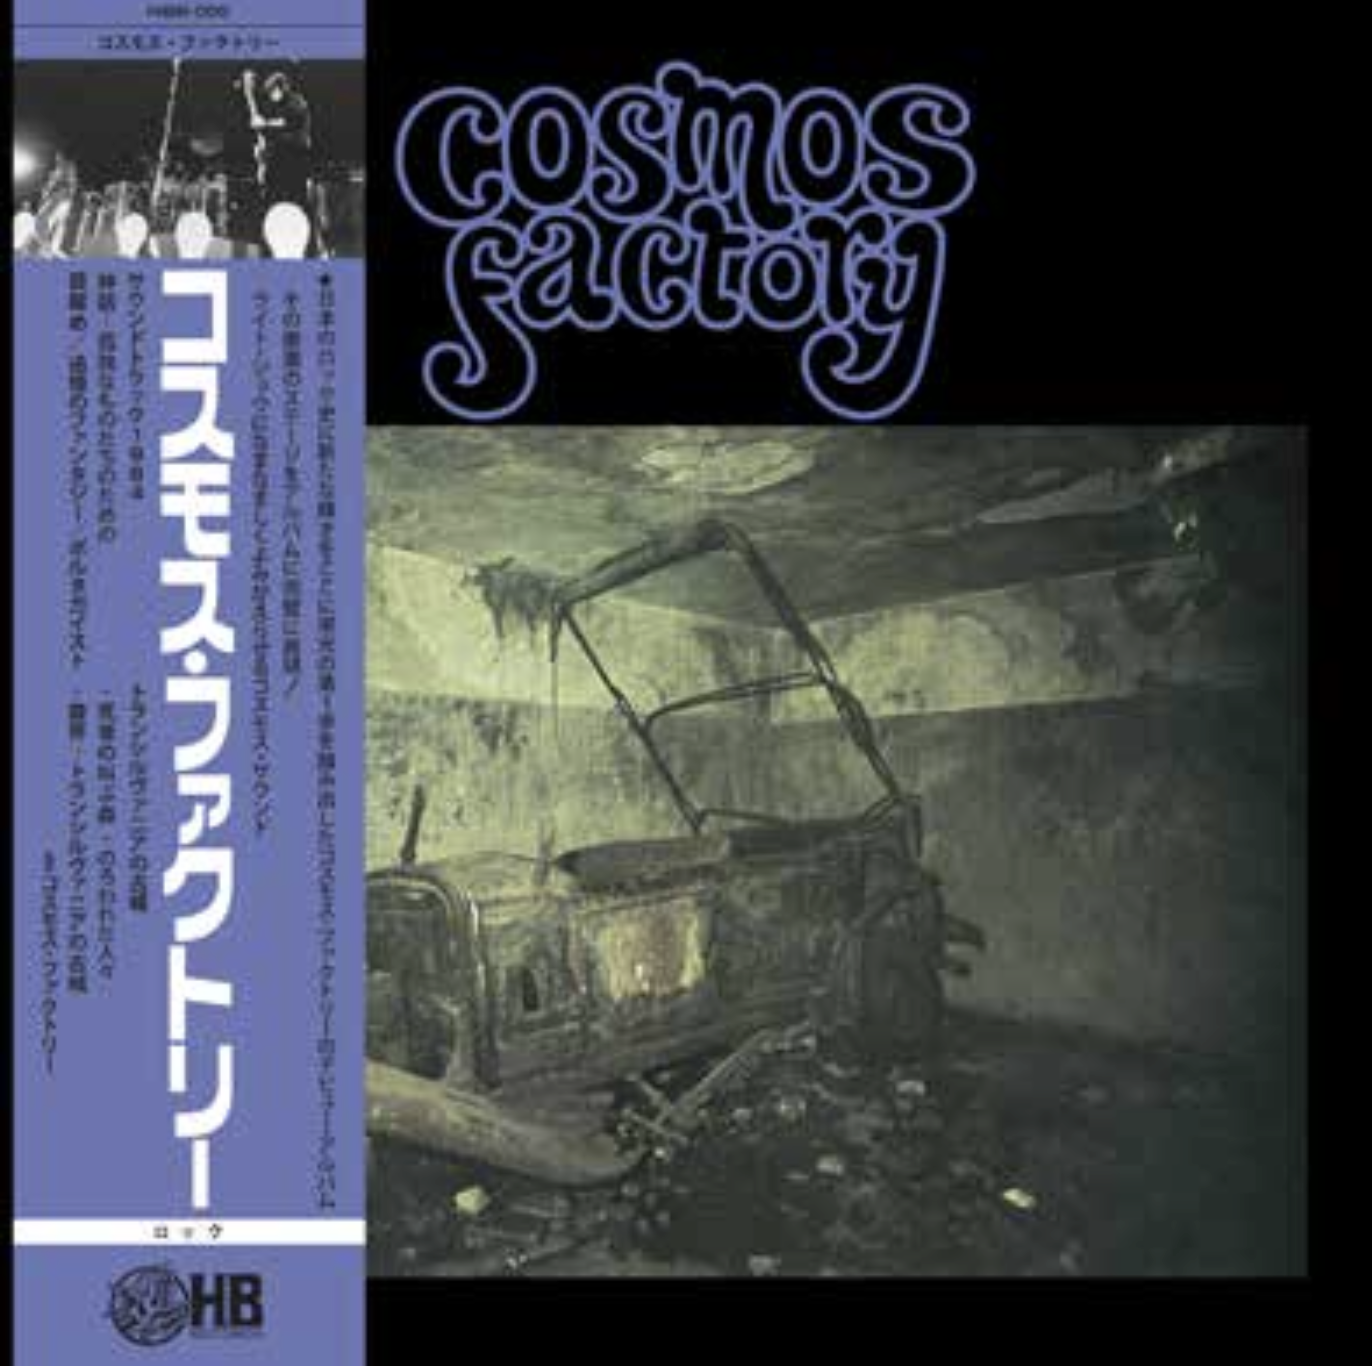 Album artwork for Album artwork for An Old Castle Of Transylvania by Cosmos Factory by An Old Castle Of Transylvania - Cosmos Factory